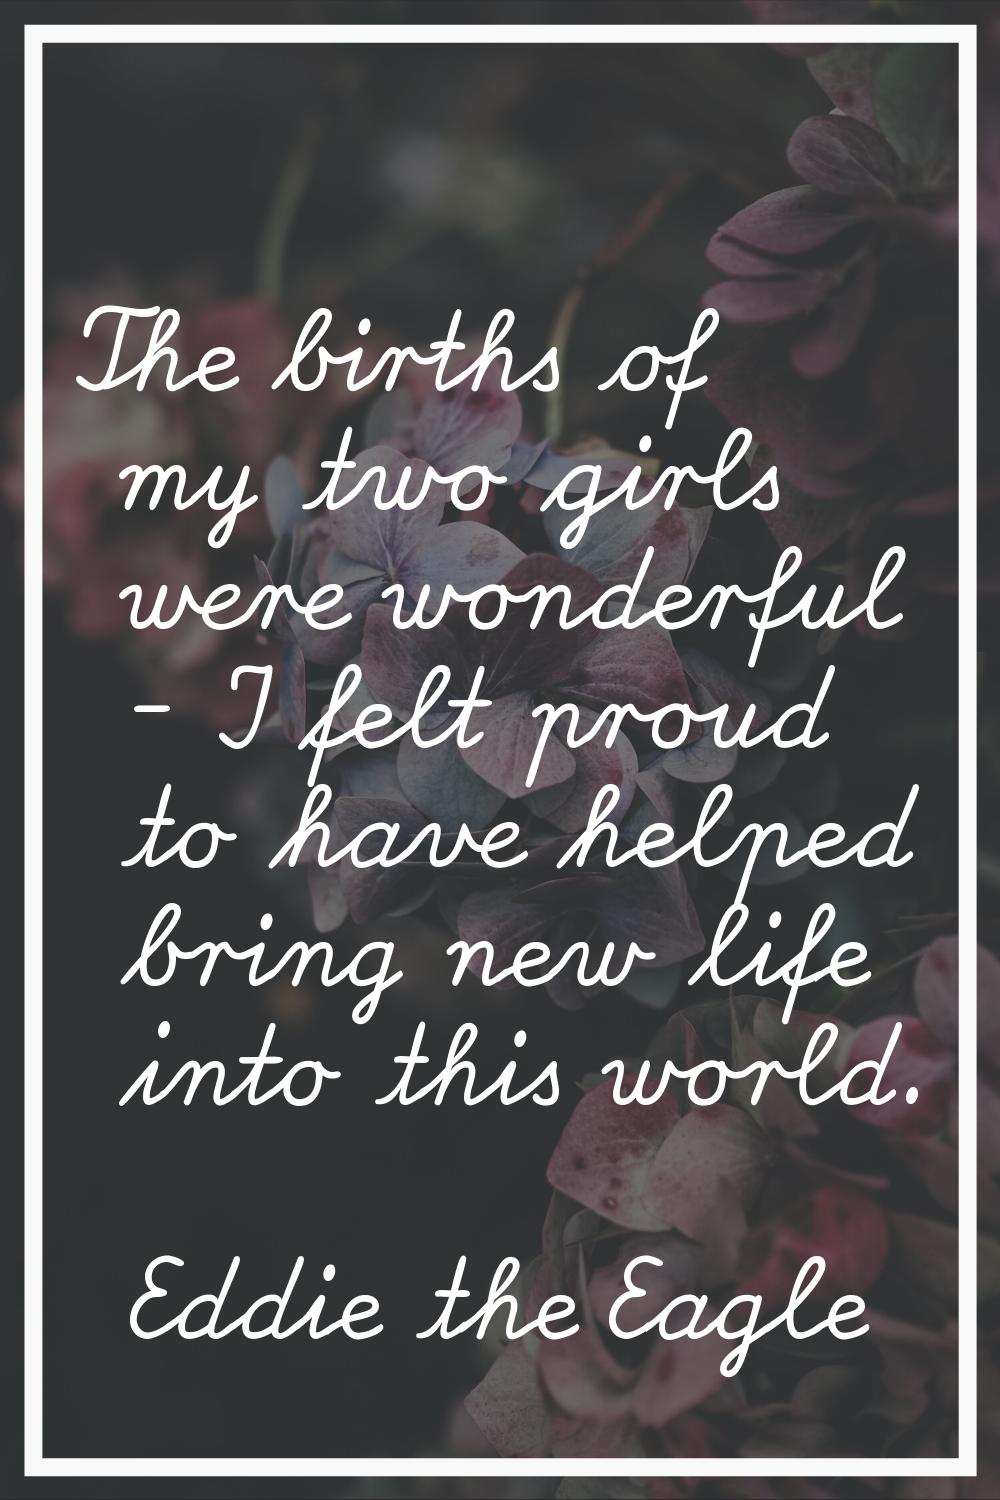 The births of my two girls were wonderful - I felt proud to have helped bring new life into this wo